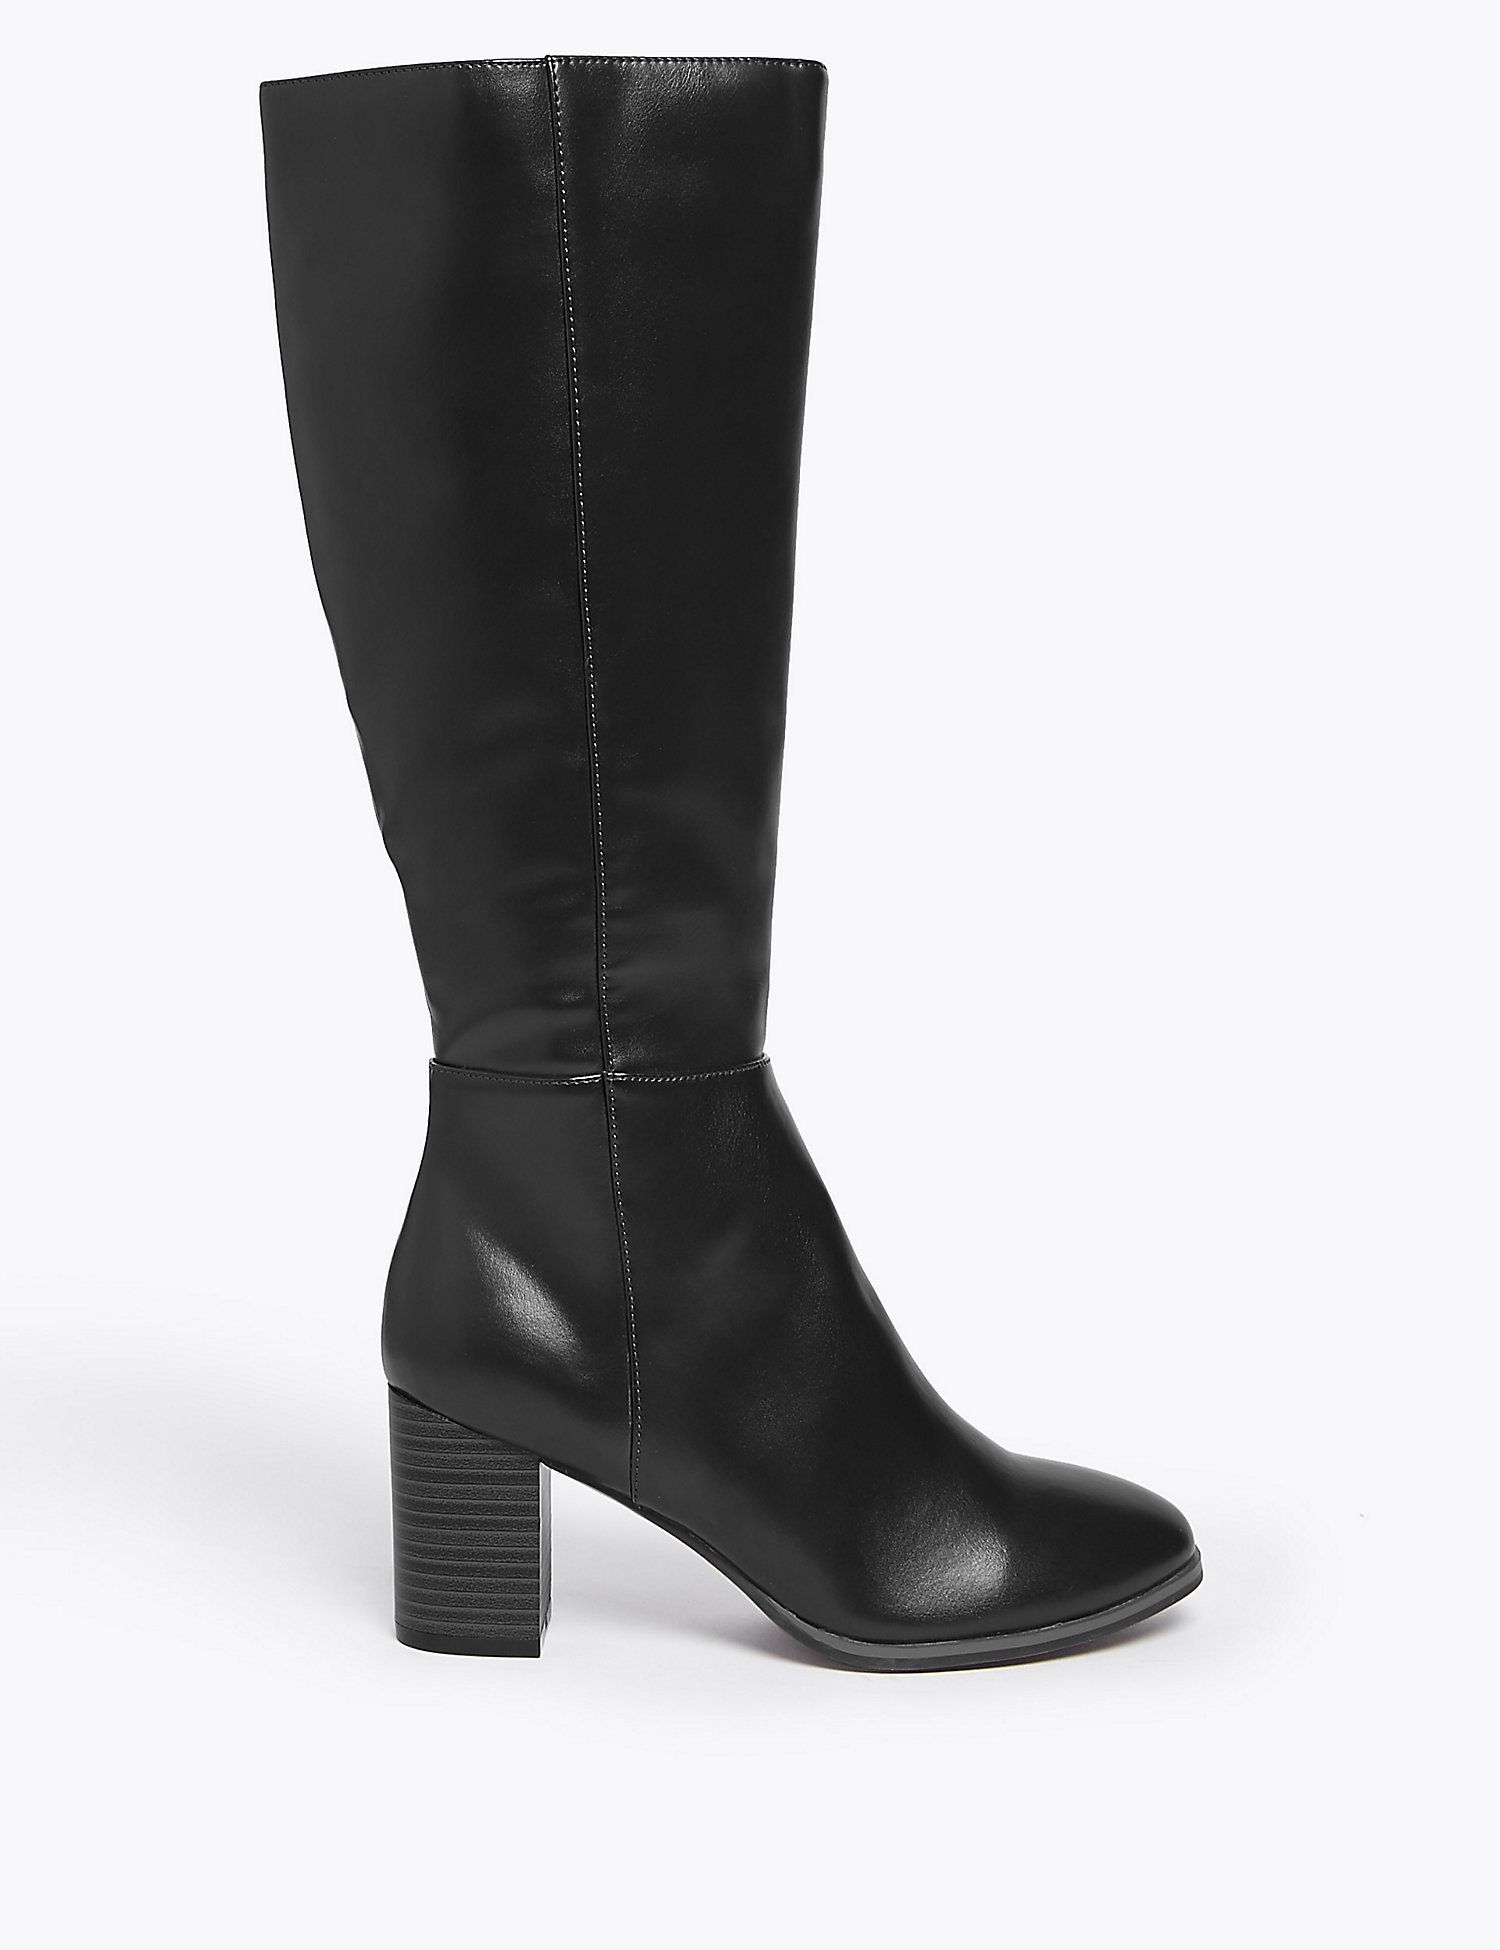 marks and spencer's boots